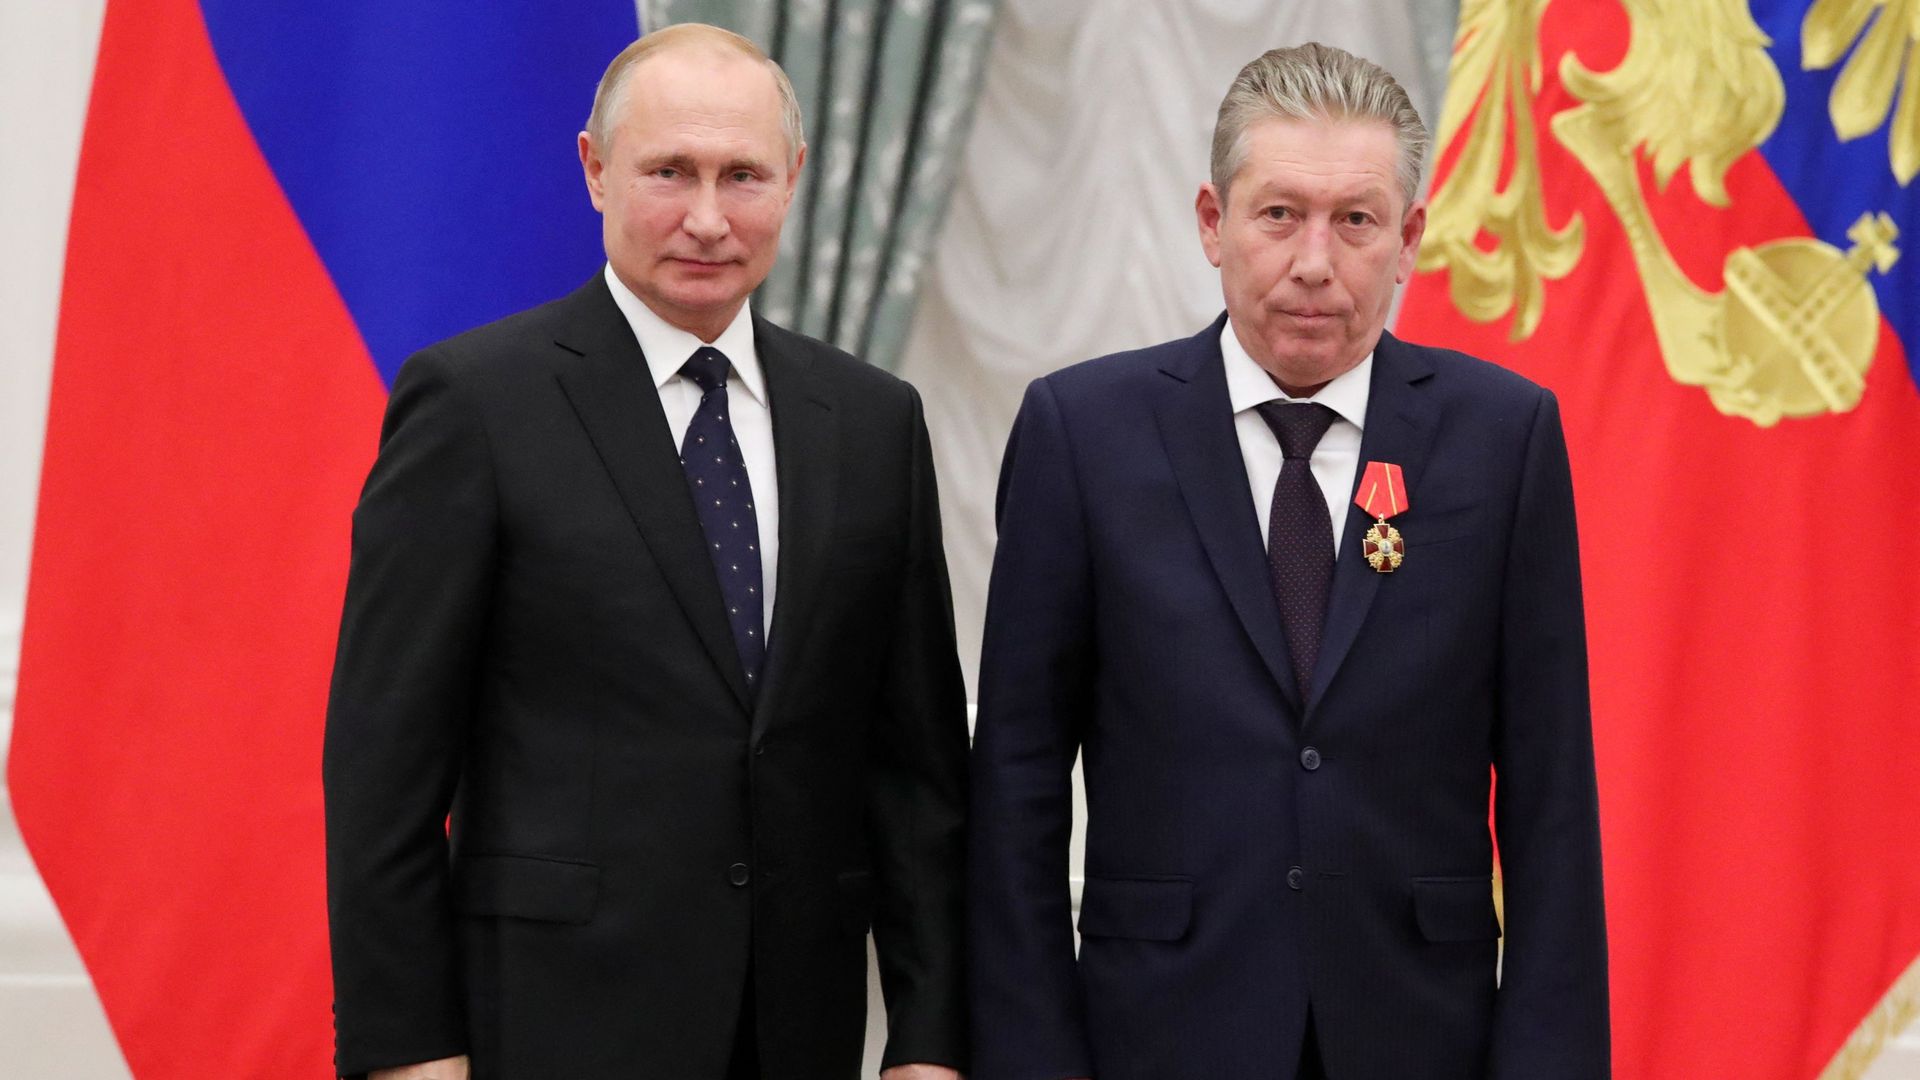 Russian President Vladimir Putin and Ravil Maganov, former chairman Lukoil's board of director in Moscow in November 2019.